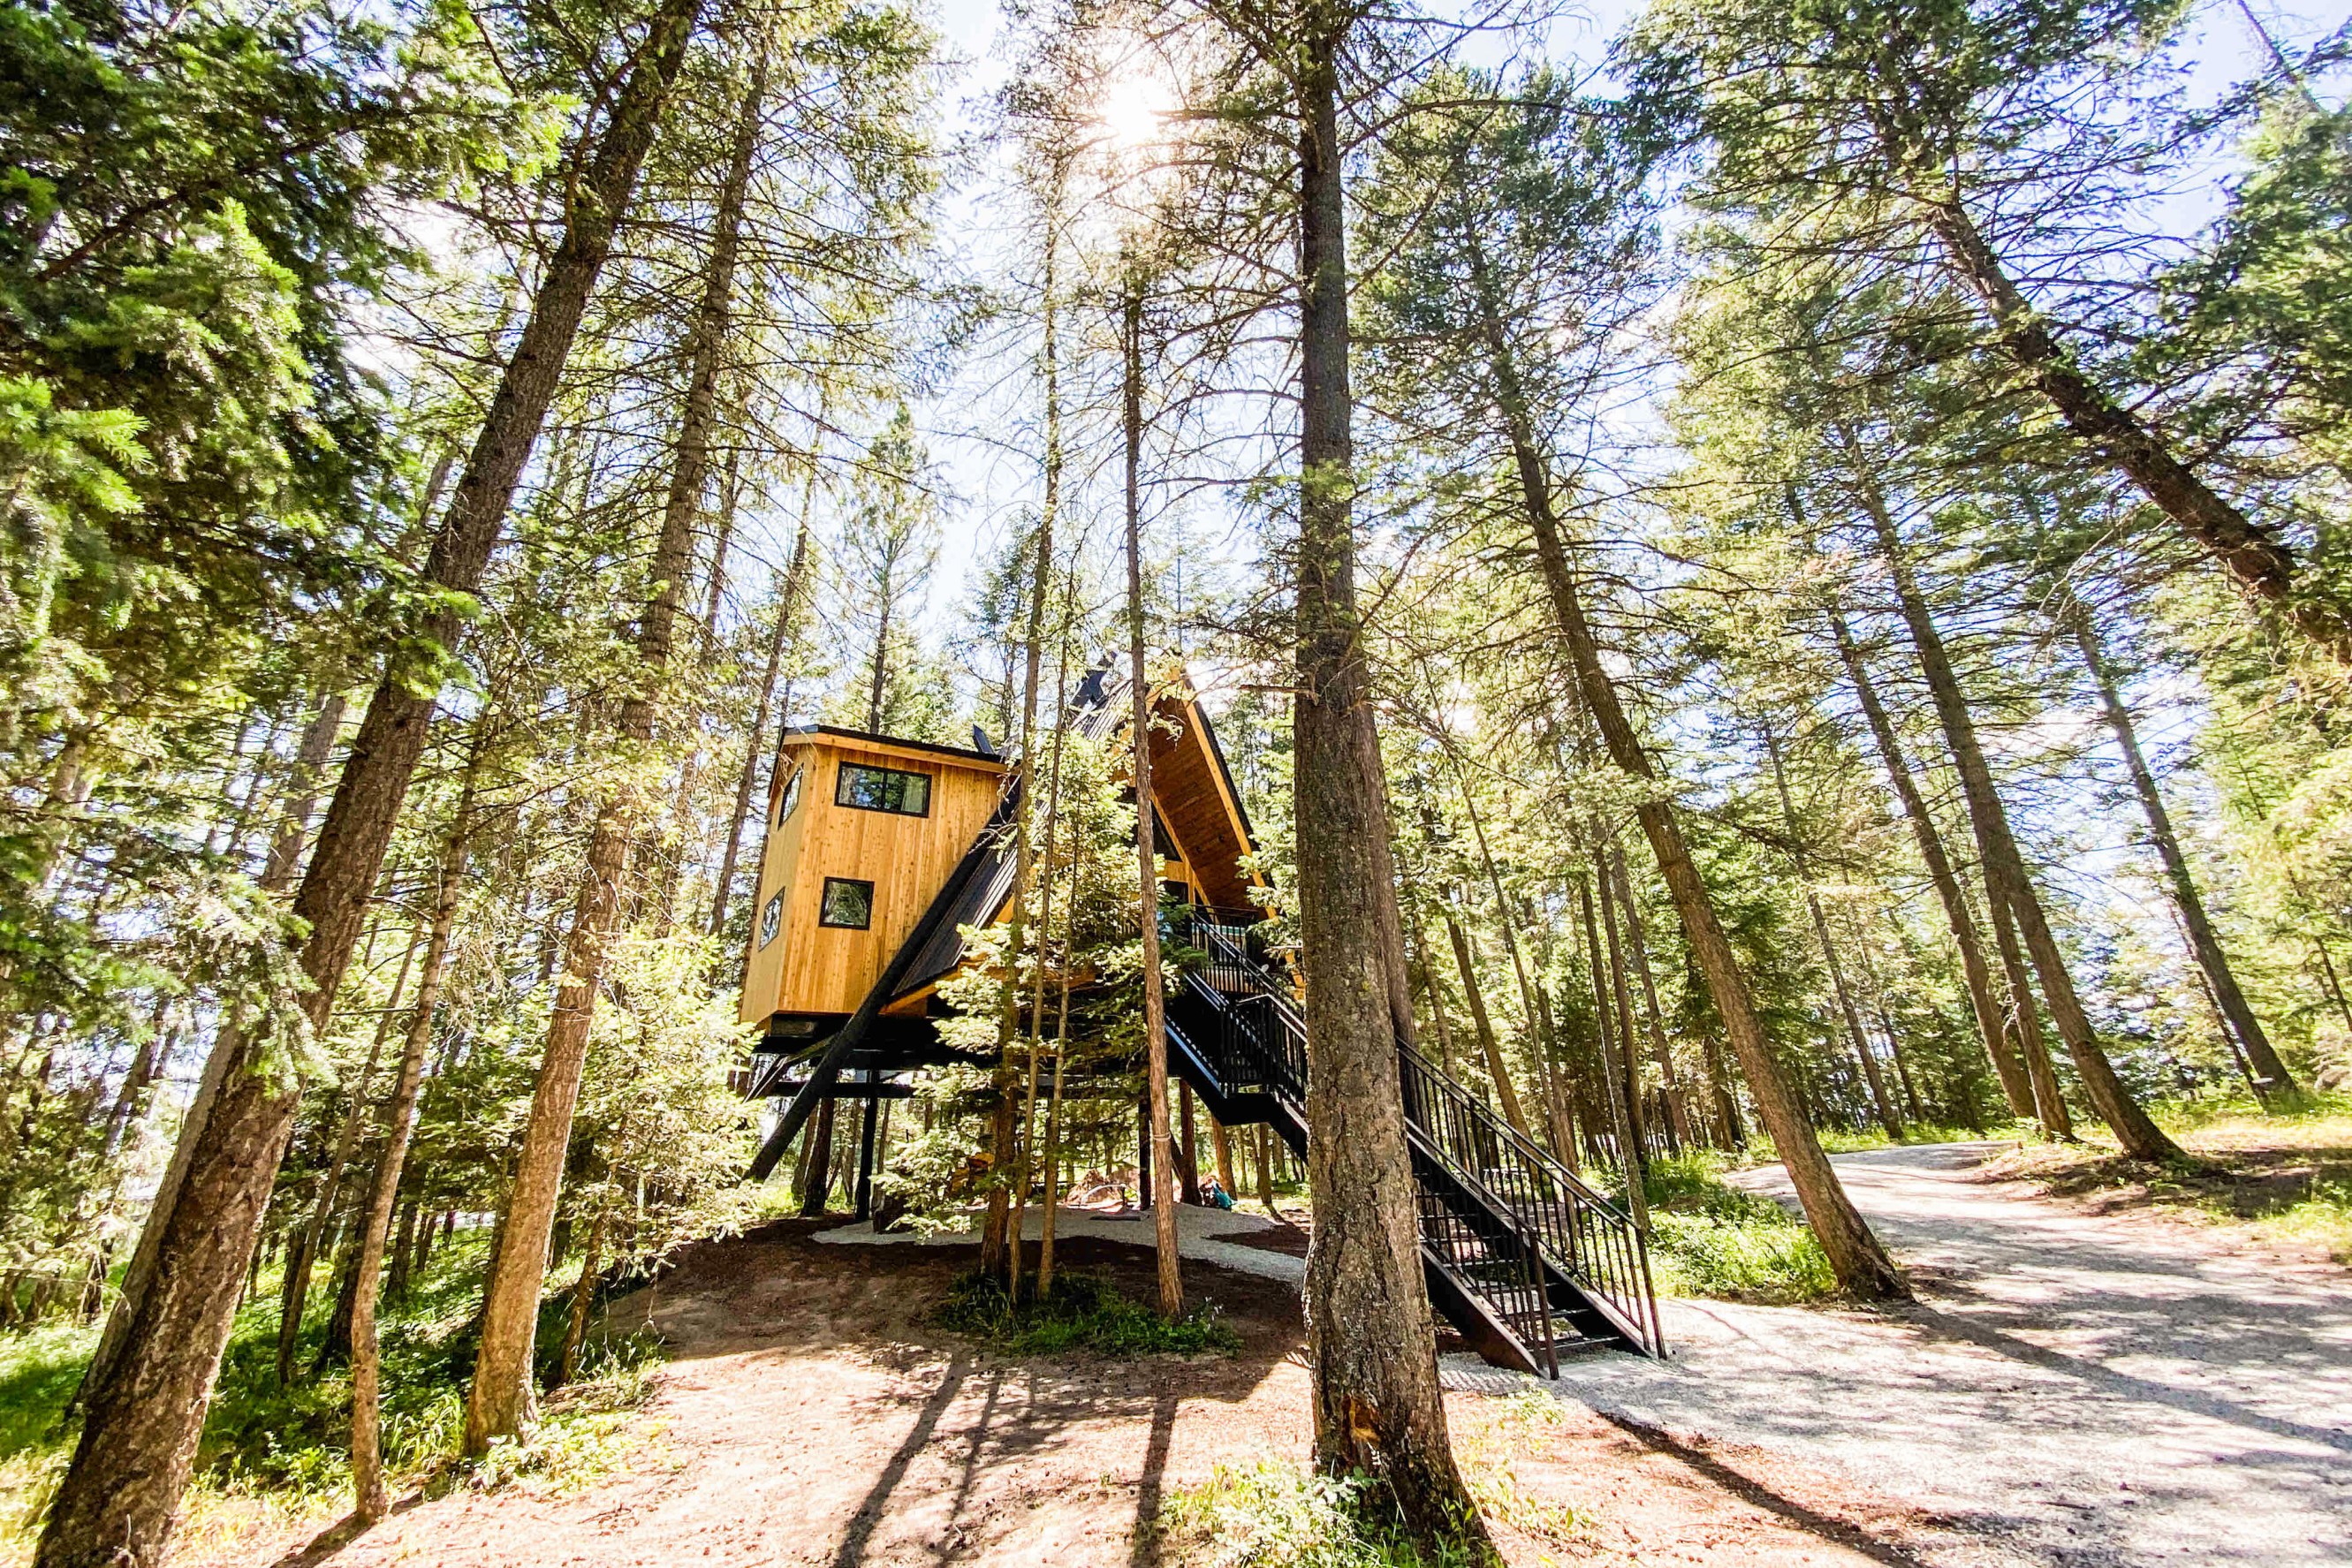 A-frame cabin elevated on stilts in the middle of a coniferous forest.